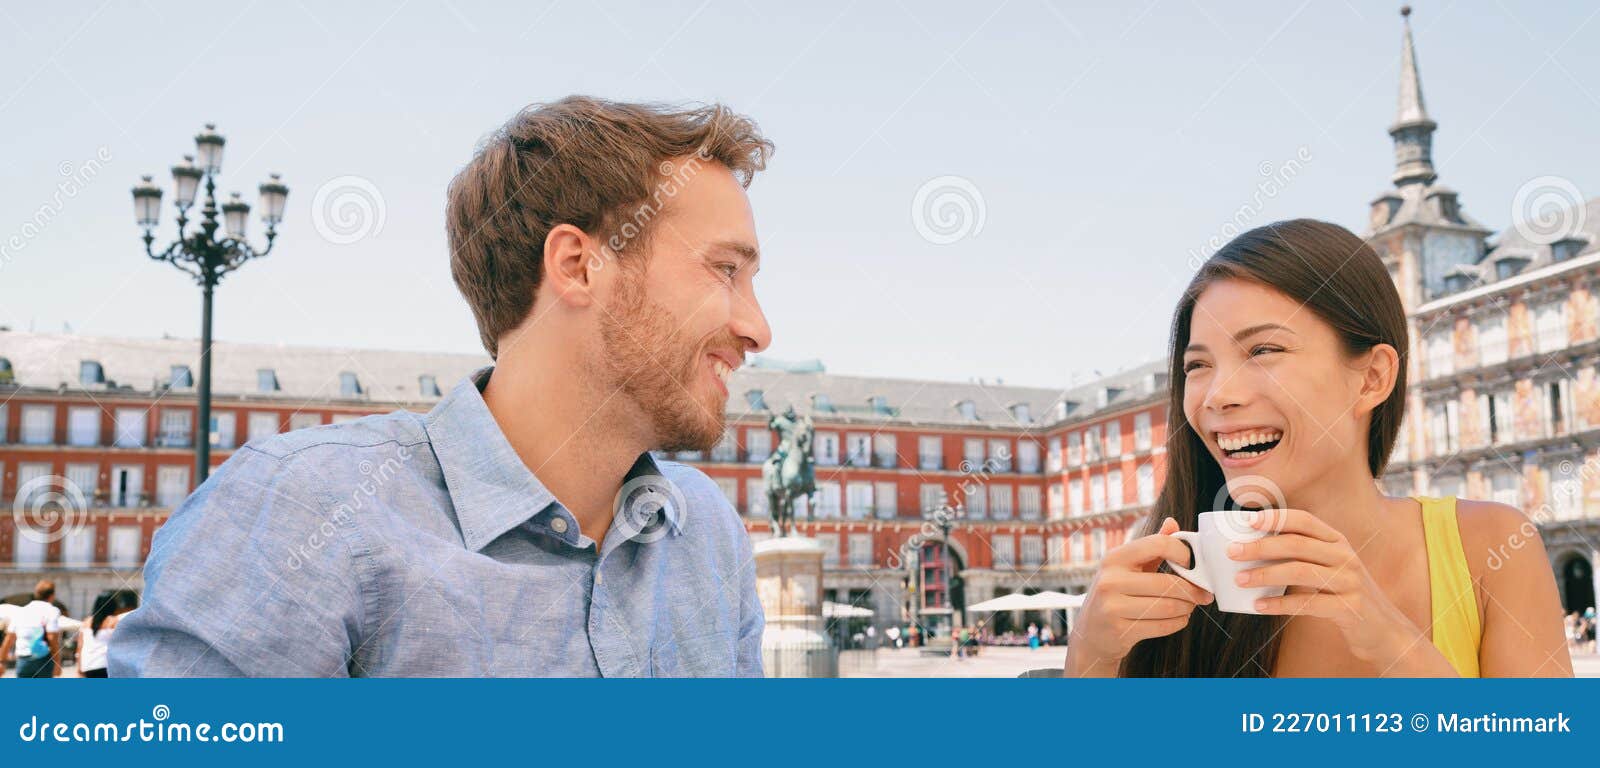 All dating sites in Madrid